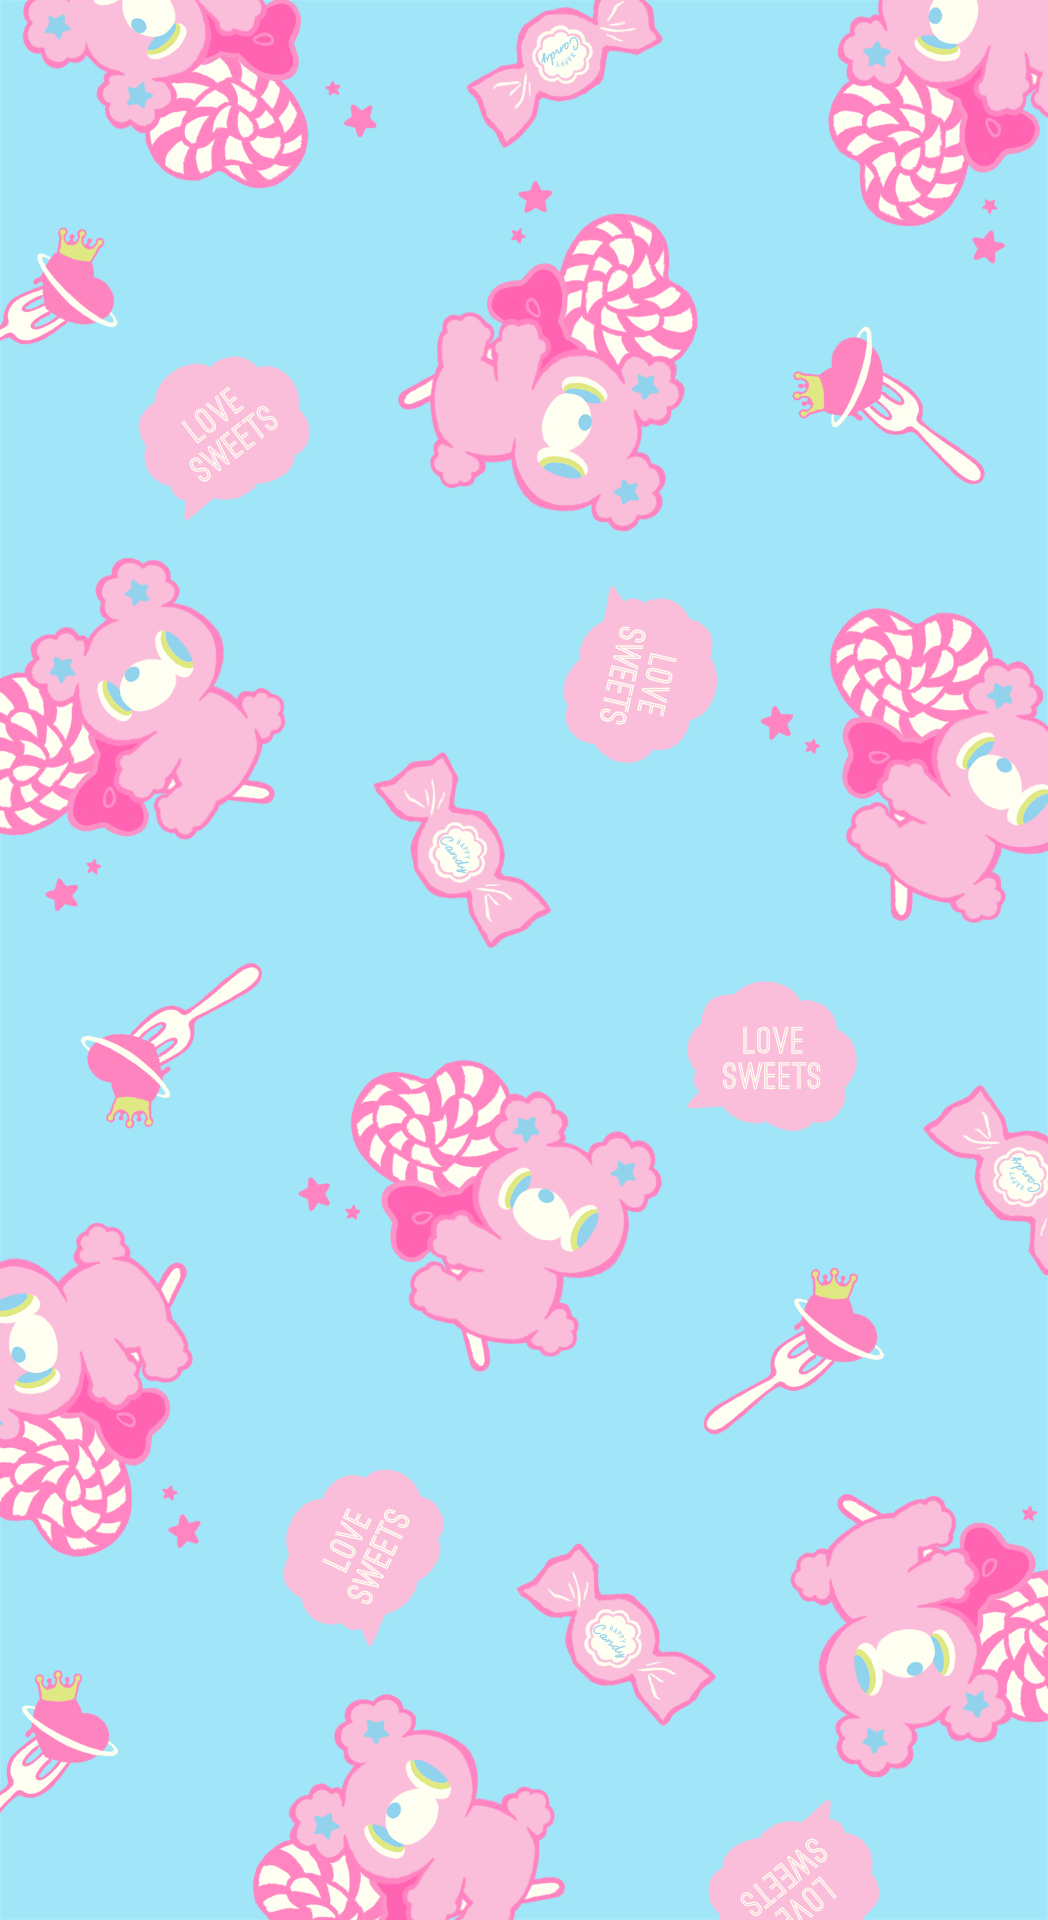 Ddlg Wallpapers